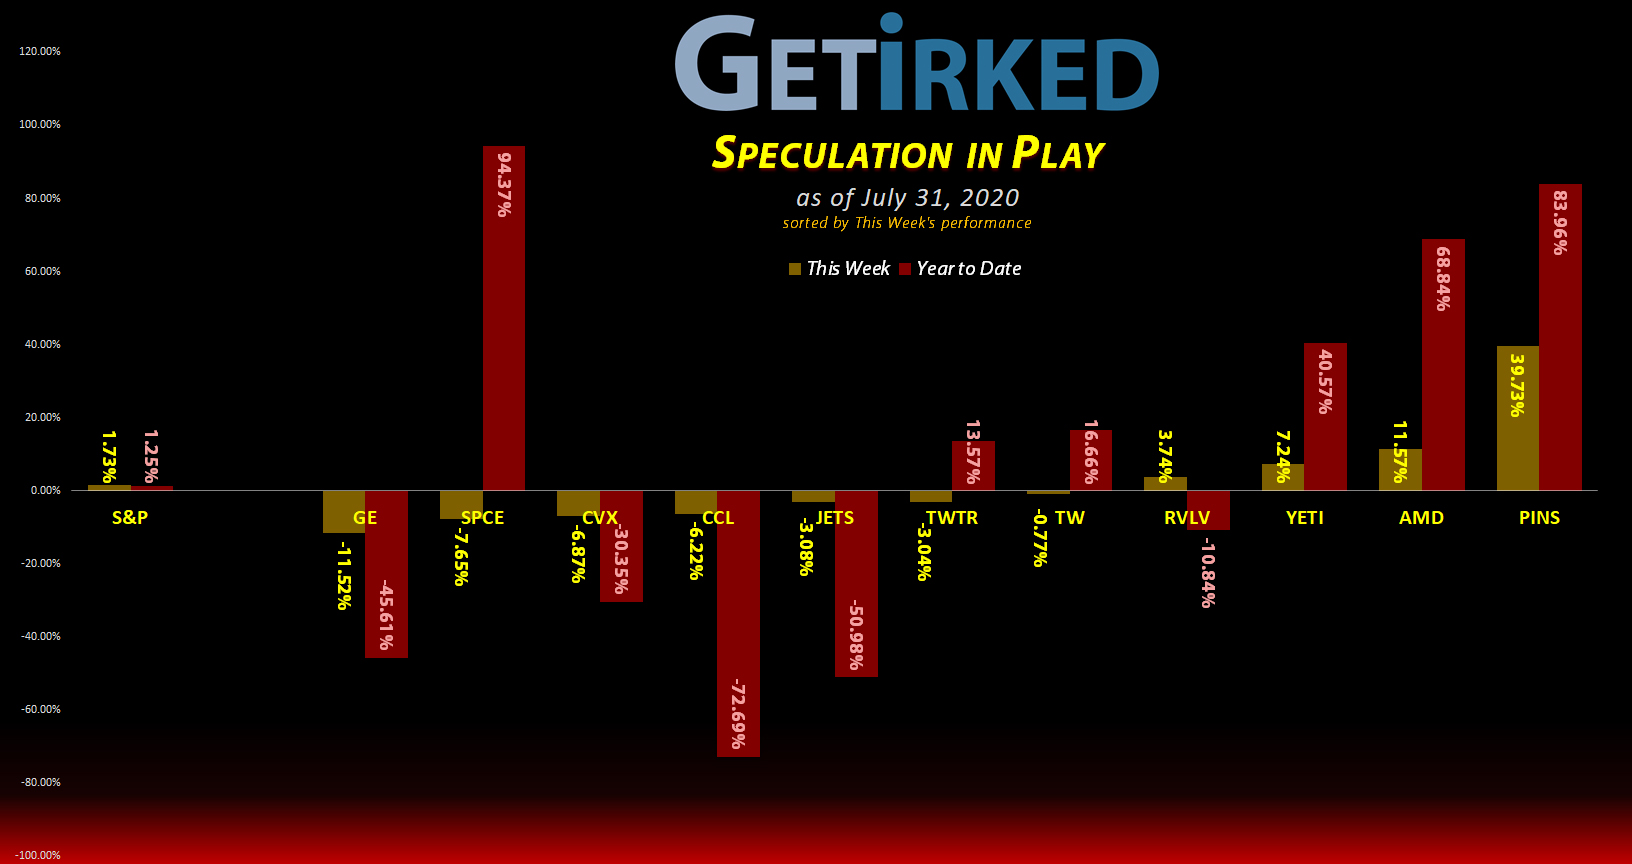 Get Irked's Speculation in Play - July 31, 2020